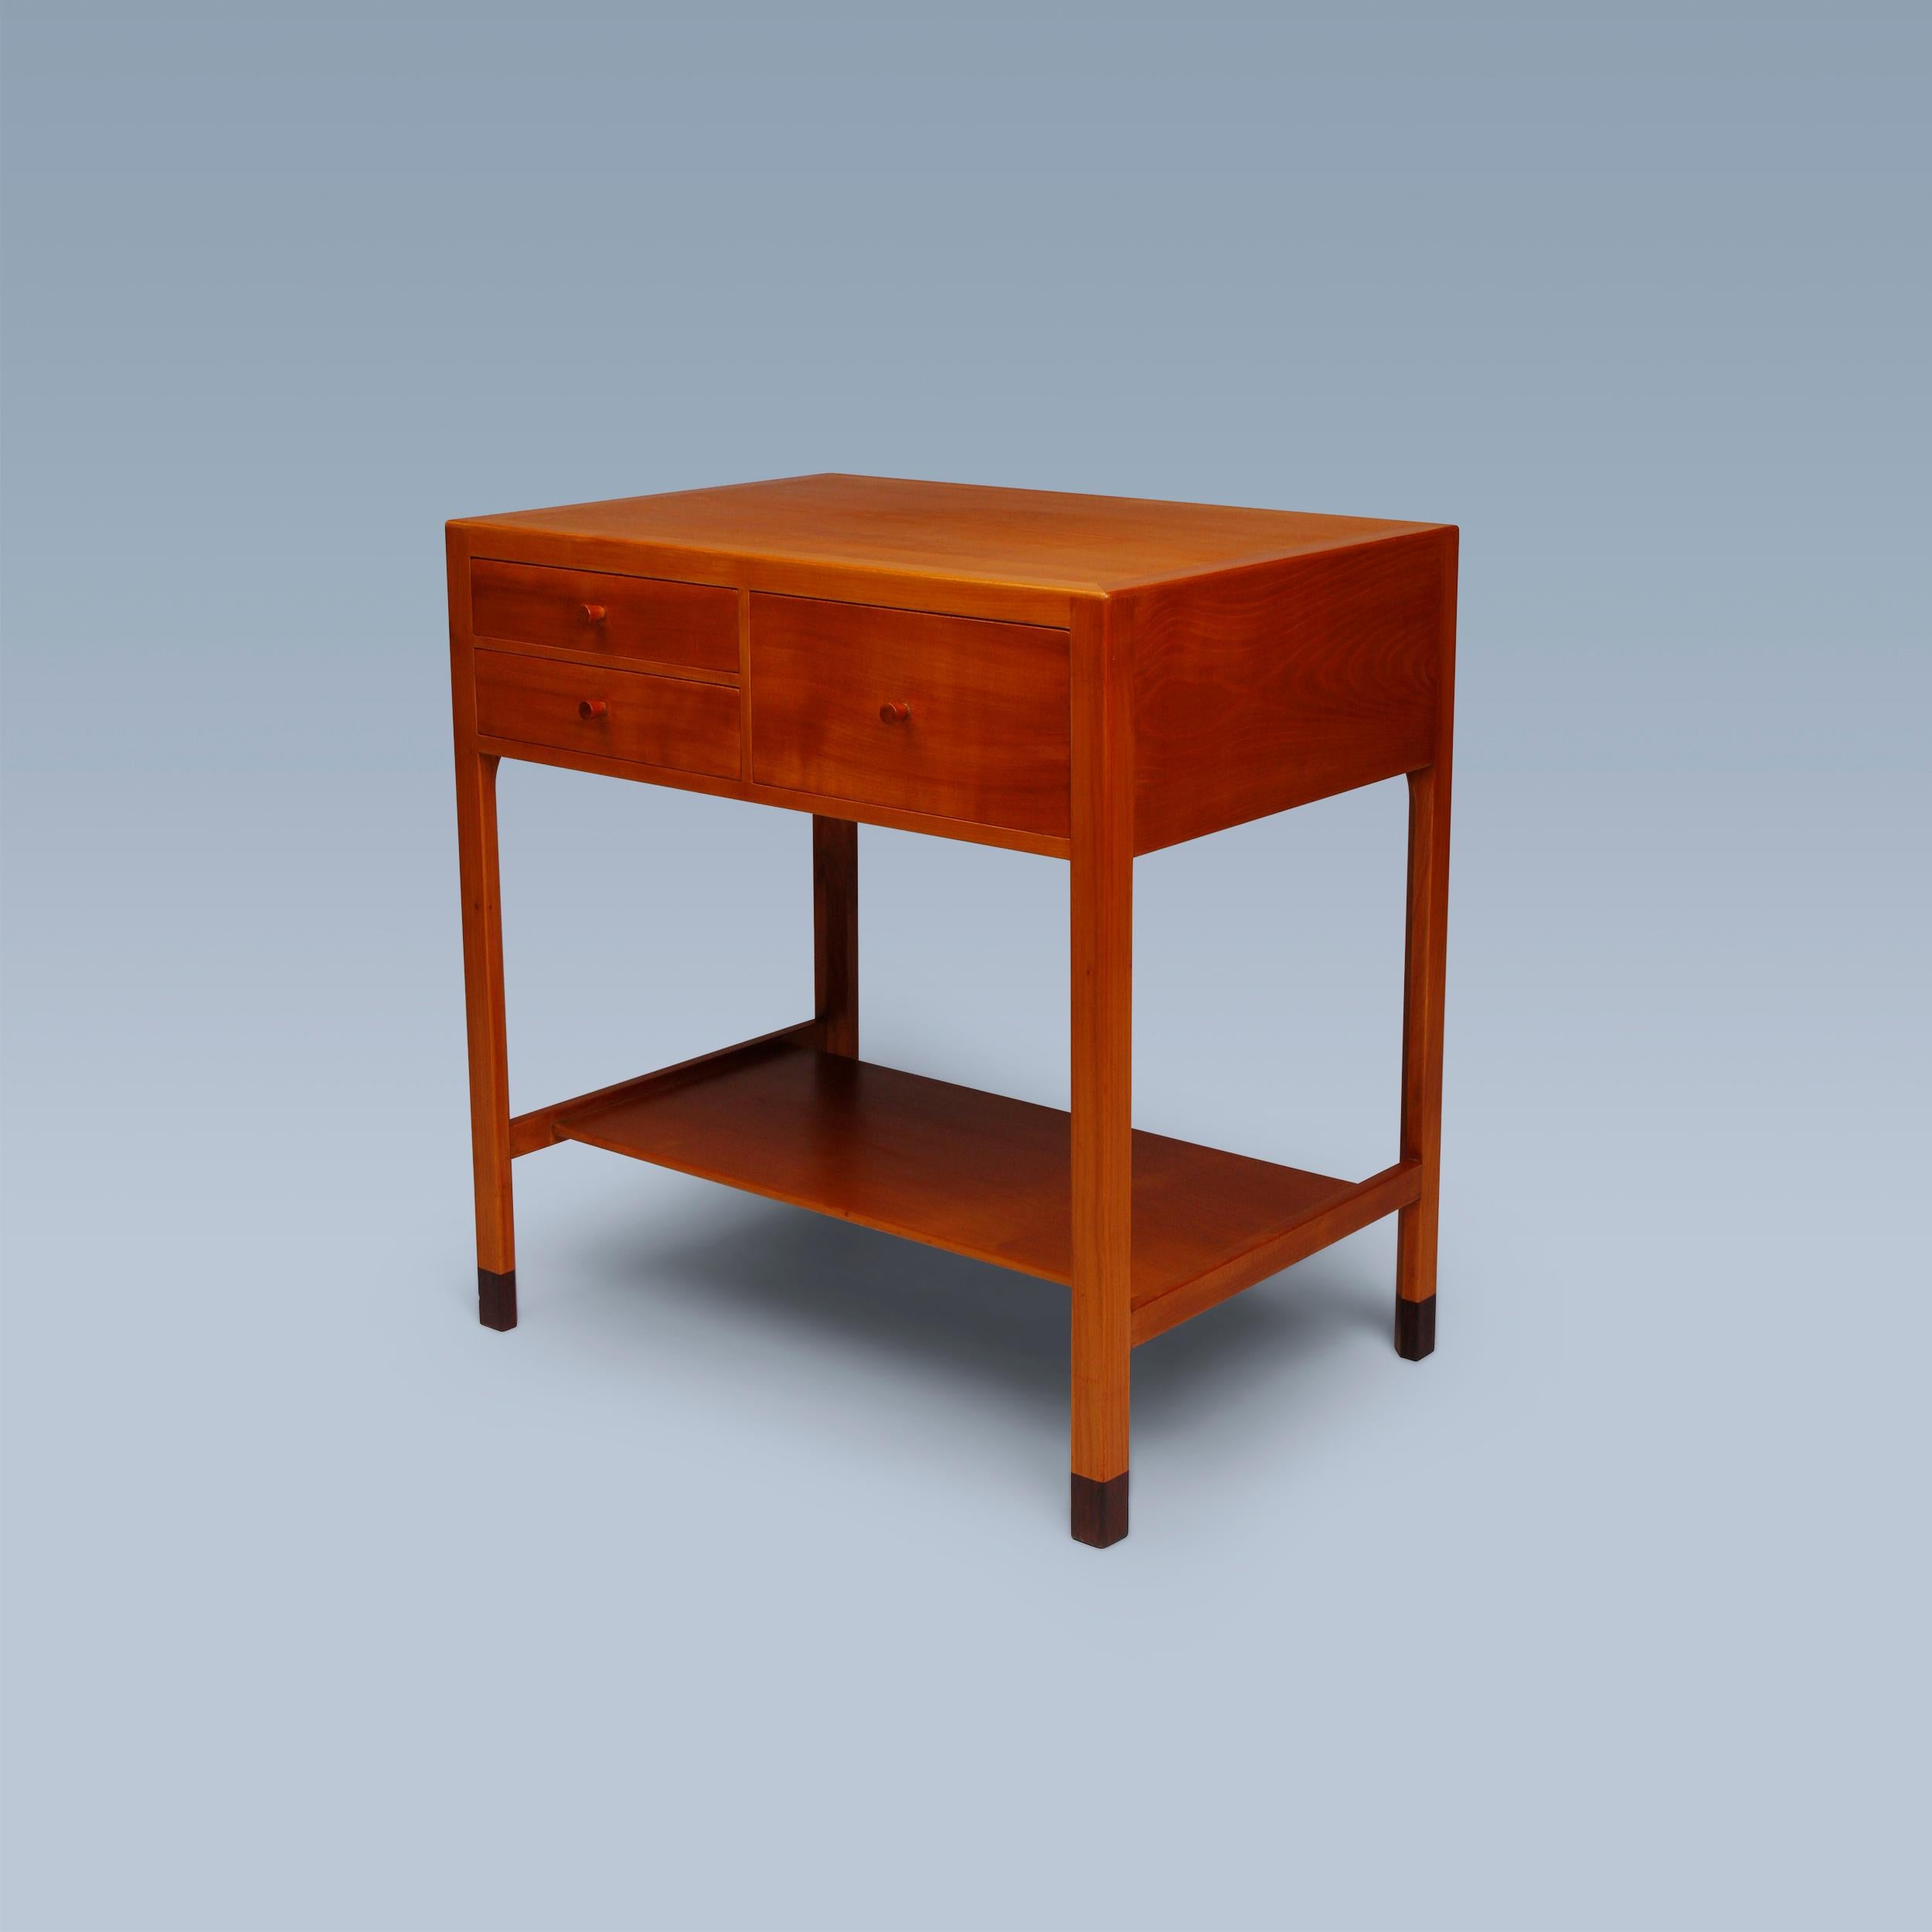 20th Century Danish modern cherry wood side table with drawers and shelf For Sale